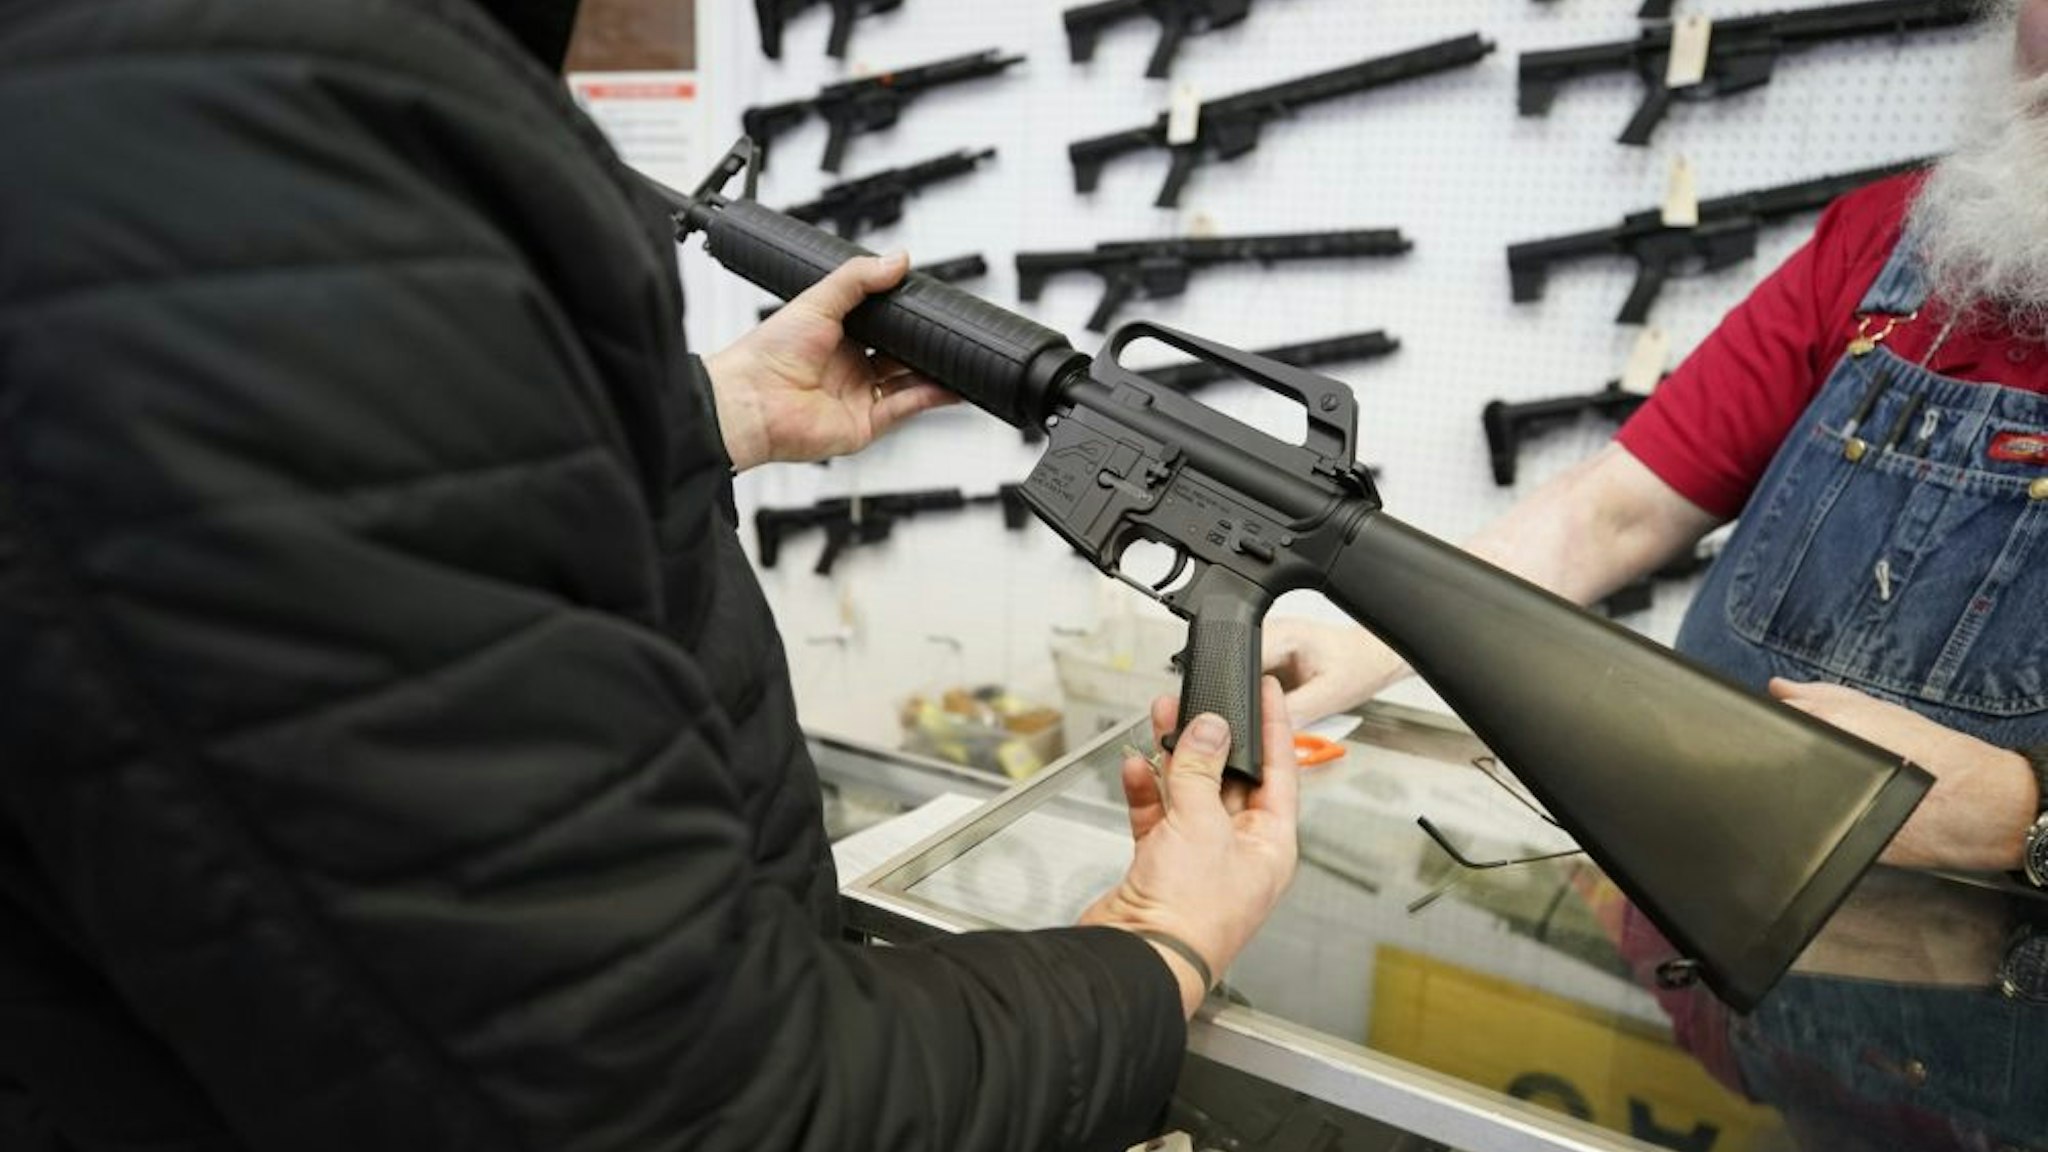 A salesperson shows an AR-15 rifle to a customer at a store in Orem, Utah, U.S., on Thursday, March 25, 2021. Two mass shootings in one week are giving Democrats new urgency to pass gun control legislation, but opposition from Republicans in the Senate remains the biggest obstacle to any breakthrough in the long-stalled debate.